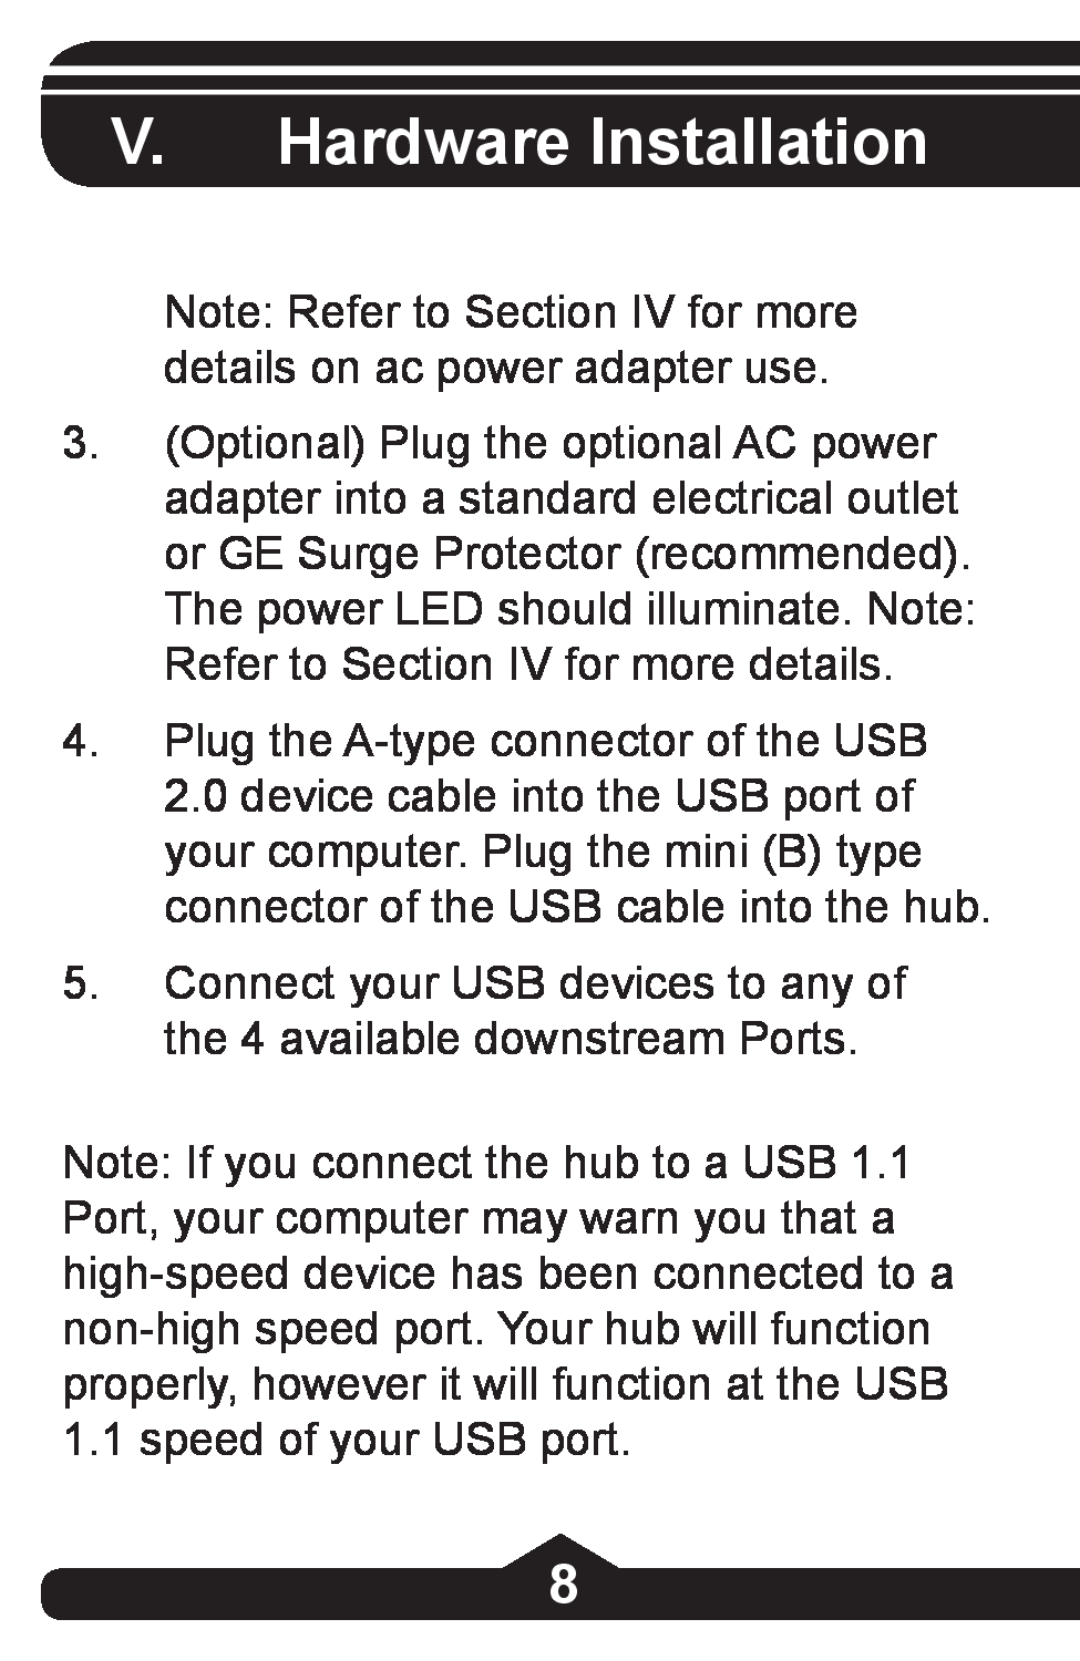 Jasco HO97844 V. Hardware Installation, Note Refer to Section IV for more details on ac power adapter use 